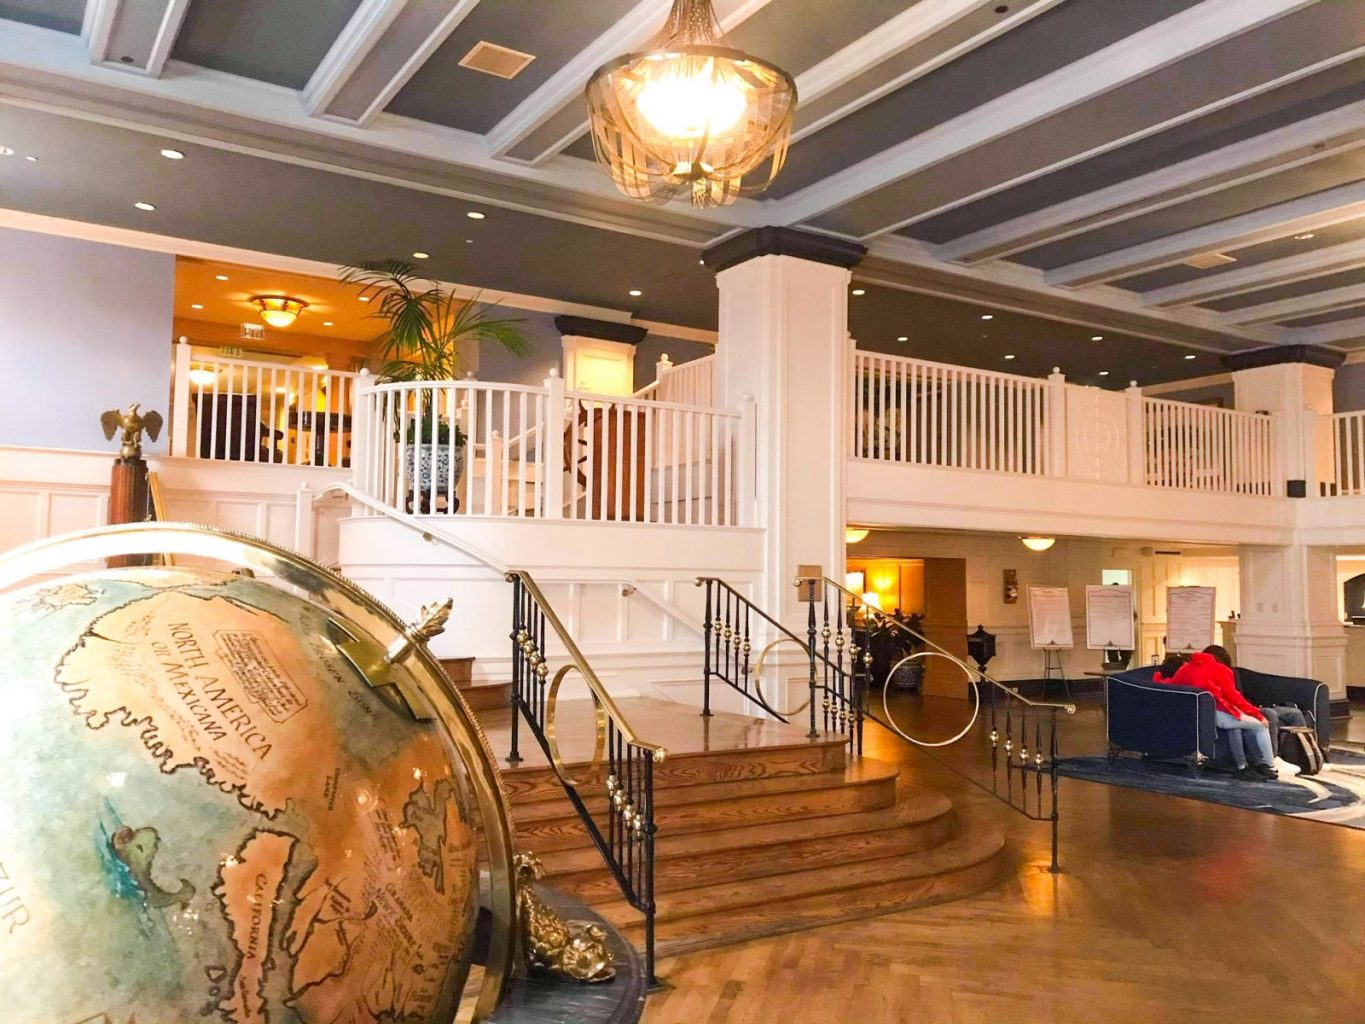 view of a big globe and the staircase inside the lobby of the Yacht Club Resort